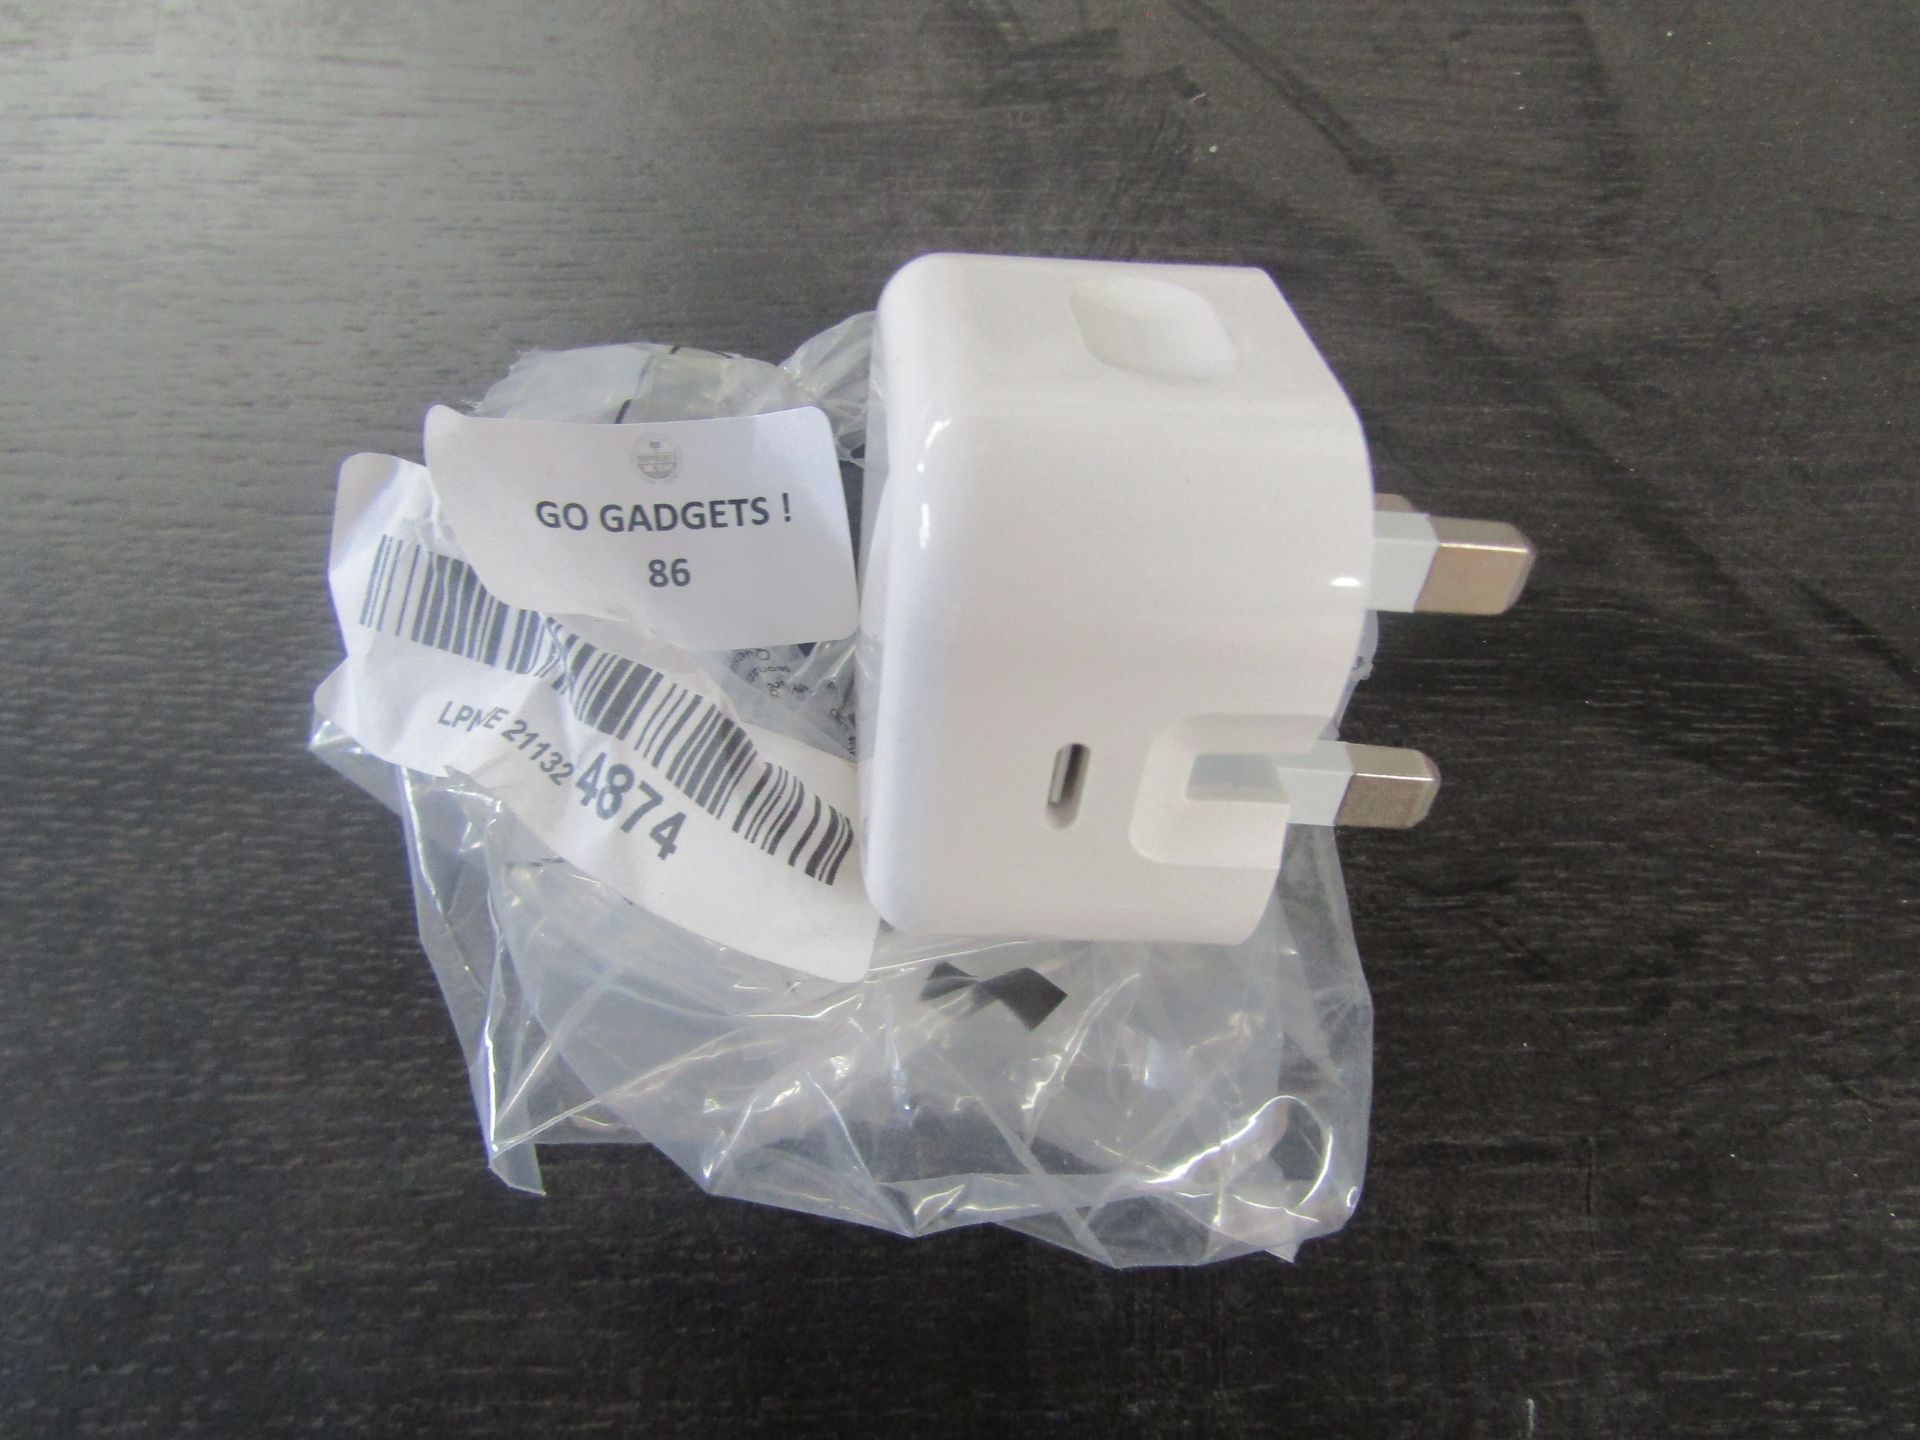 Unbranded - 20w USB-C Charger Plug - Good Condition, No Original Packaging.